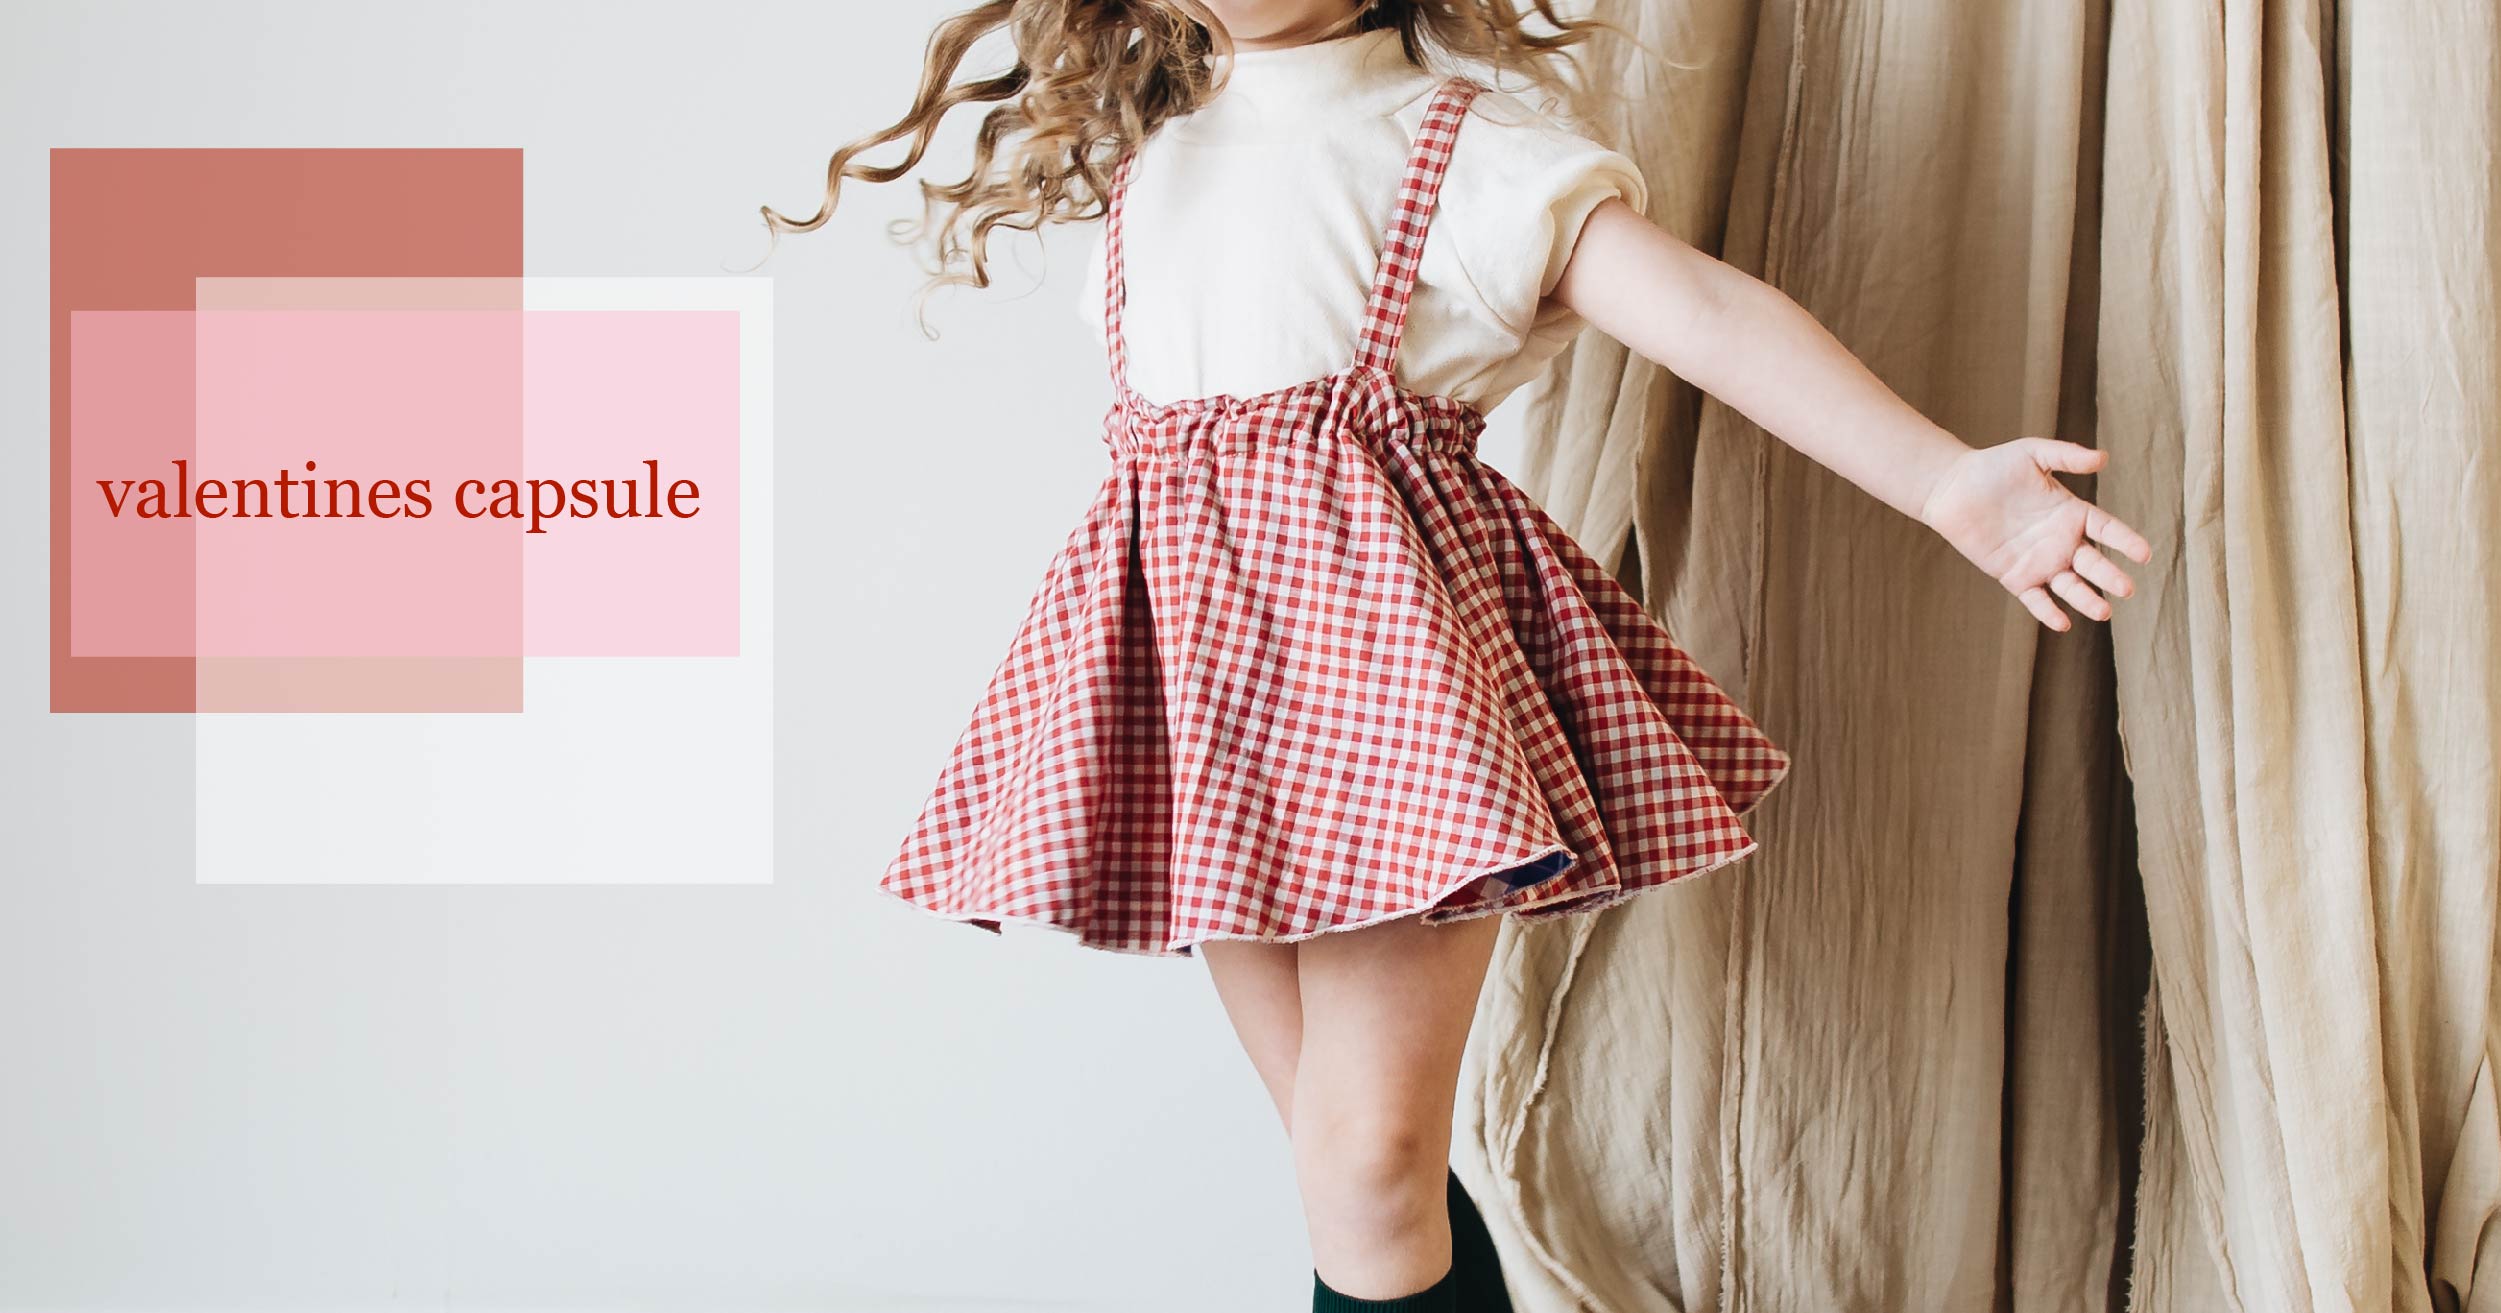 valentines kid clothing capsule collection